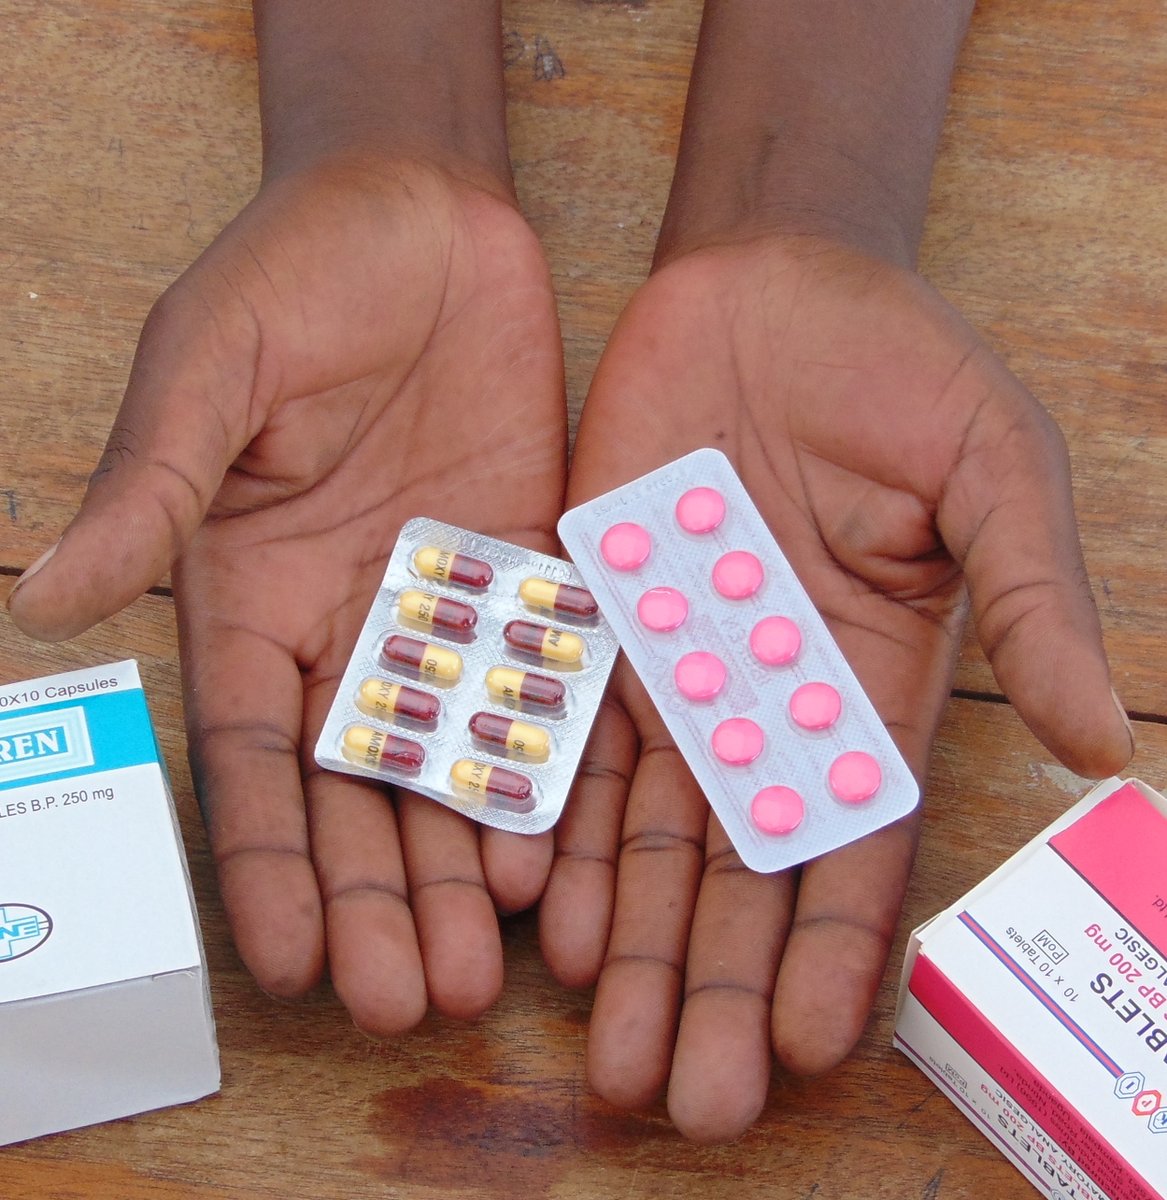 Researchers from @StAndMedicine @StAndrewsSGSD @HATUA_Research have published a paper in @LancetGH investigating the link between poverty and antibiotic misuse in East Africa. 💊 Read the paper ⬇️ tinyurl.com/27pphmrf #EverToExcel